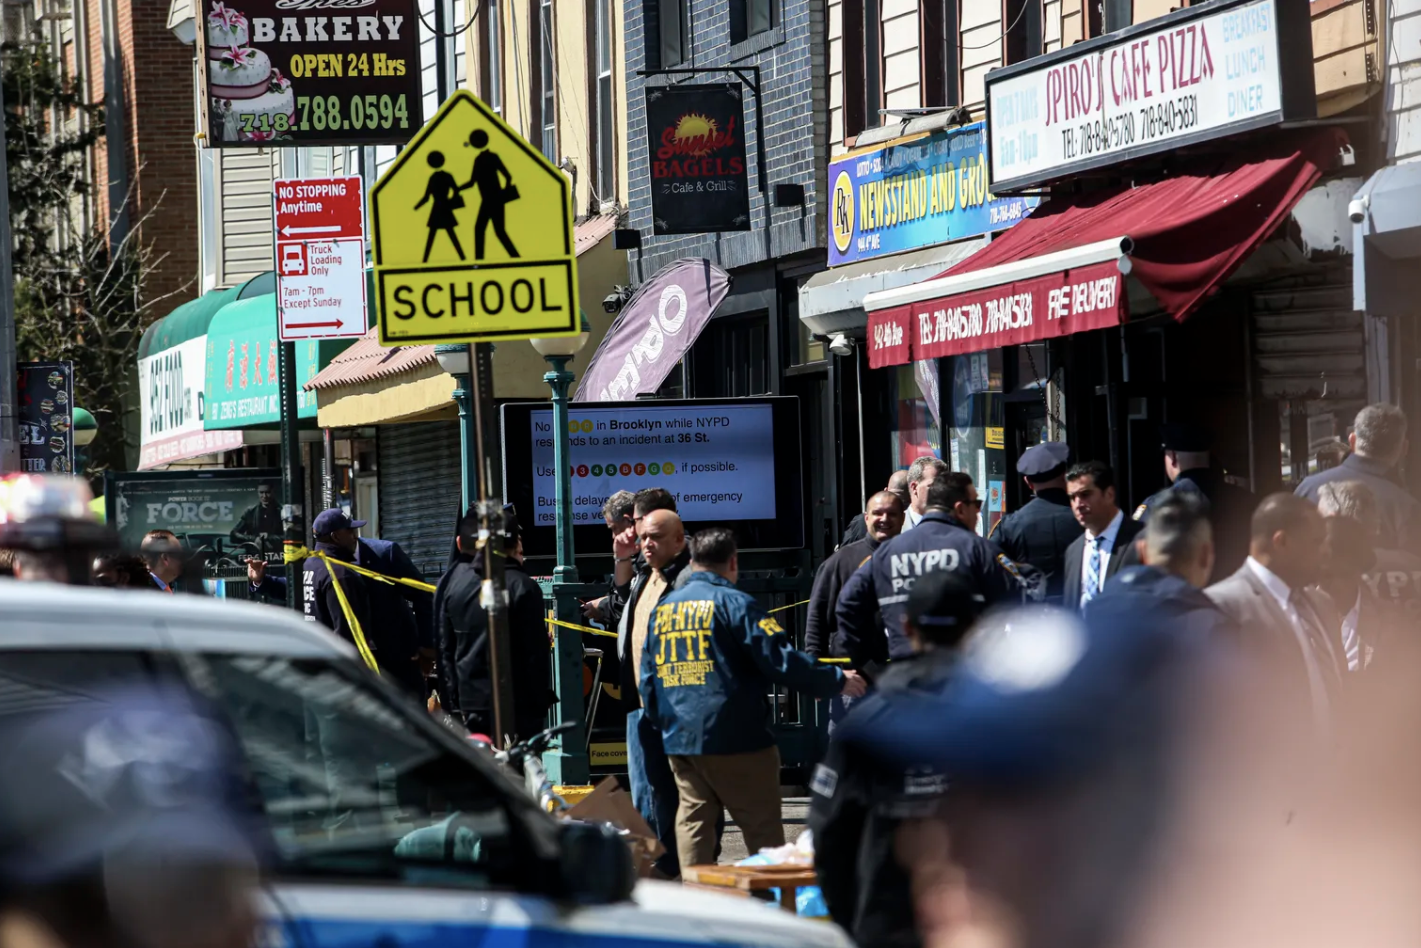 After a spate of violence in NYC, here’s expert advice on how to talk with kids